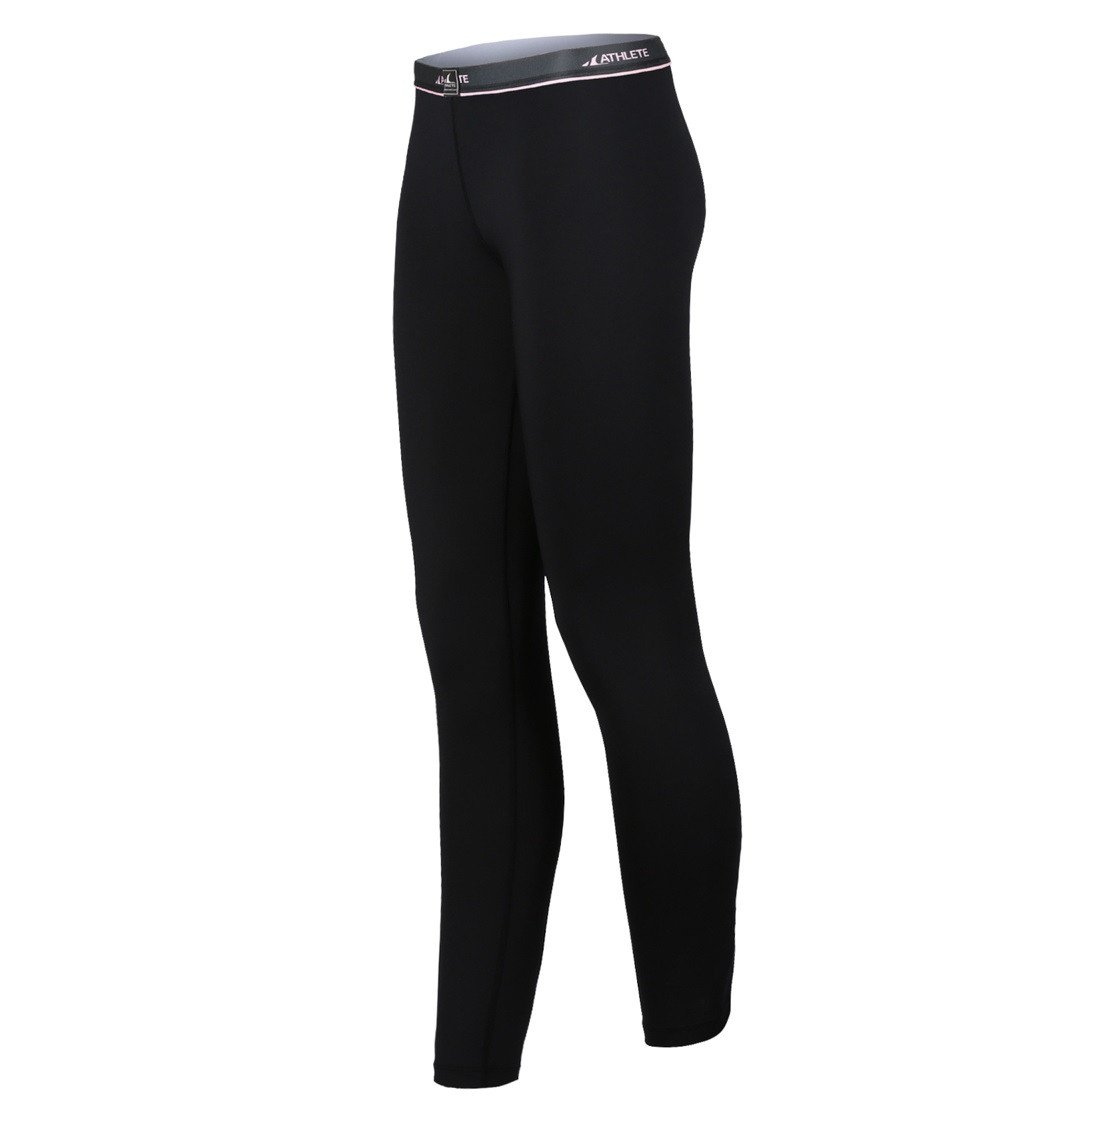 ATHLETE Women's Winter Thermal Cold Gear Compression Tights